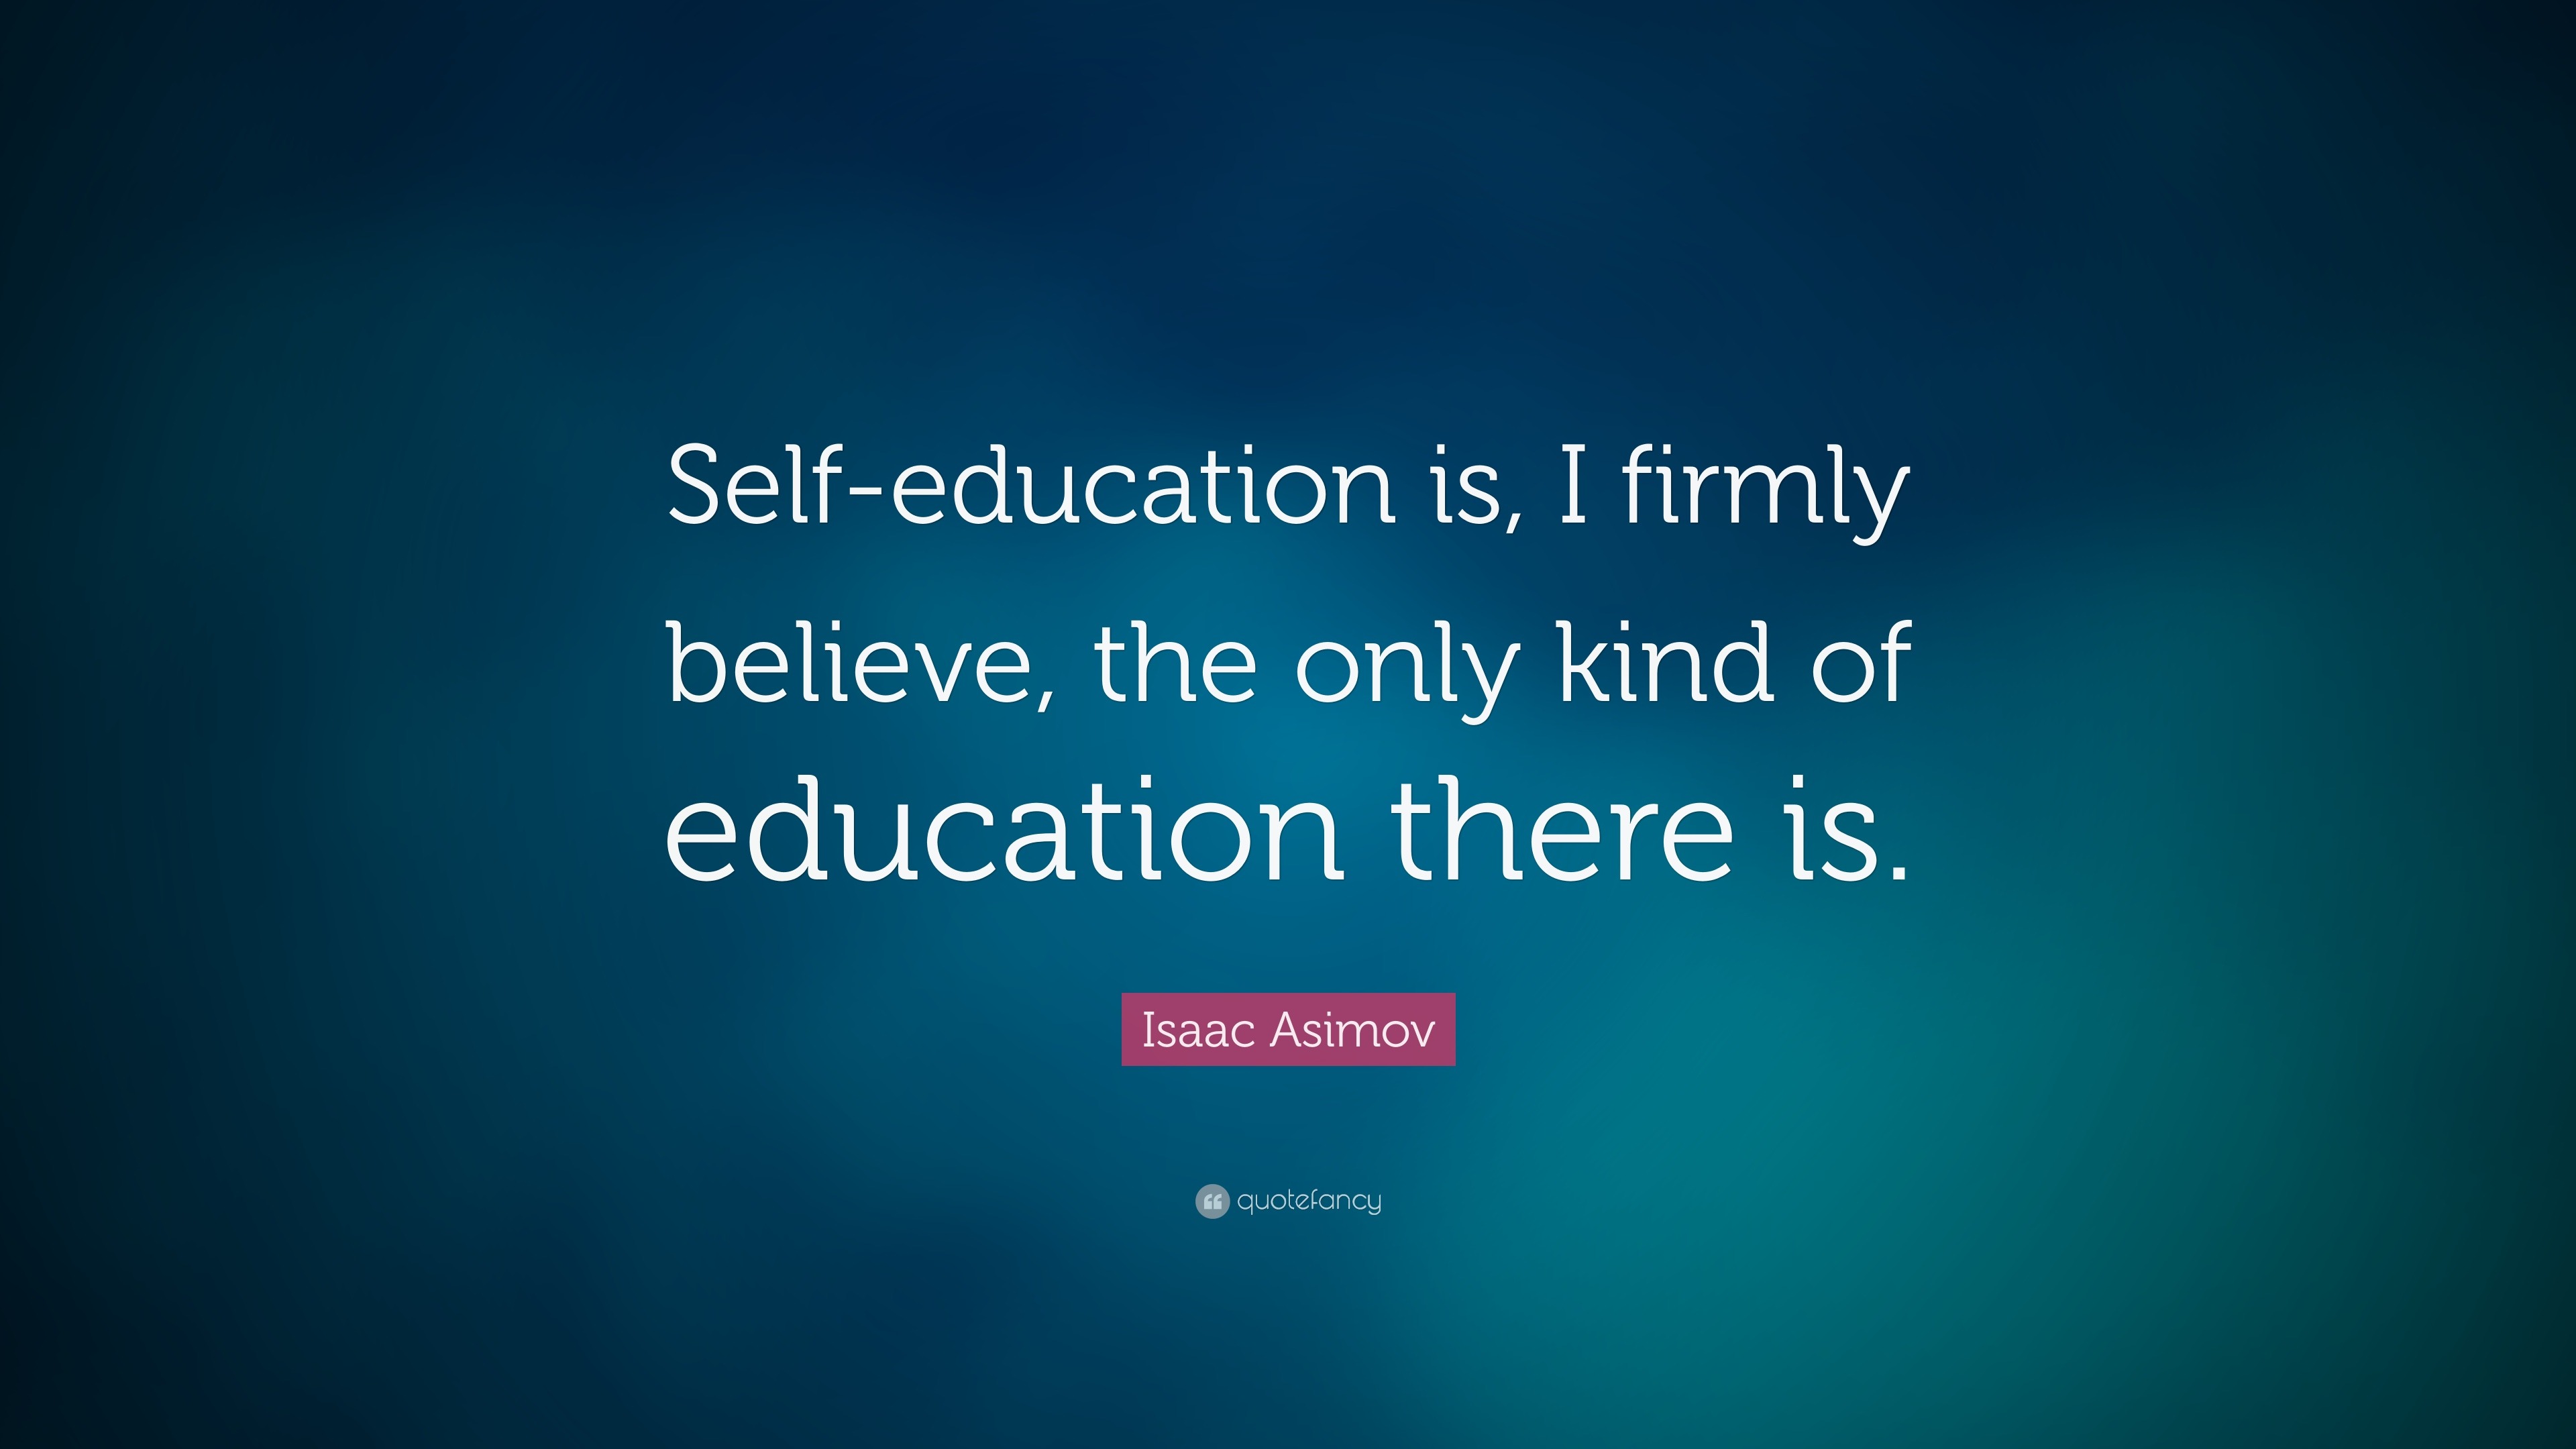 22227 Isaac Asimov Quote Self education is I firmly believe the only